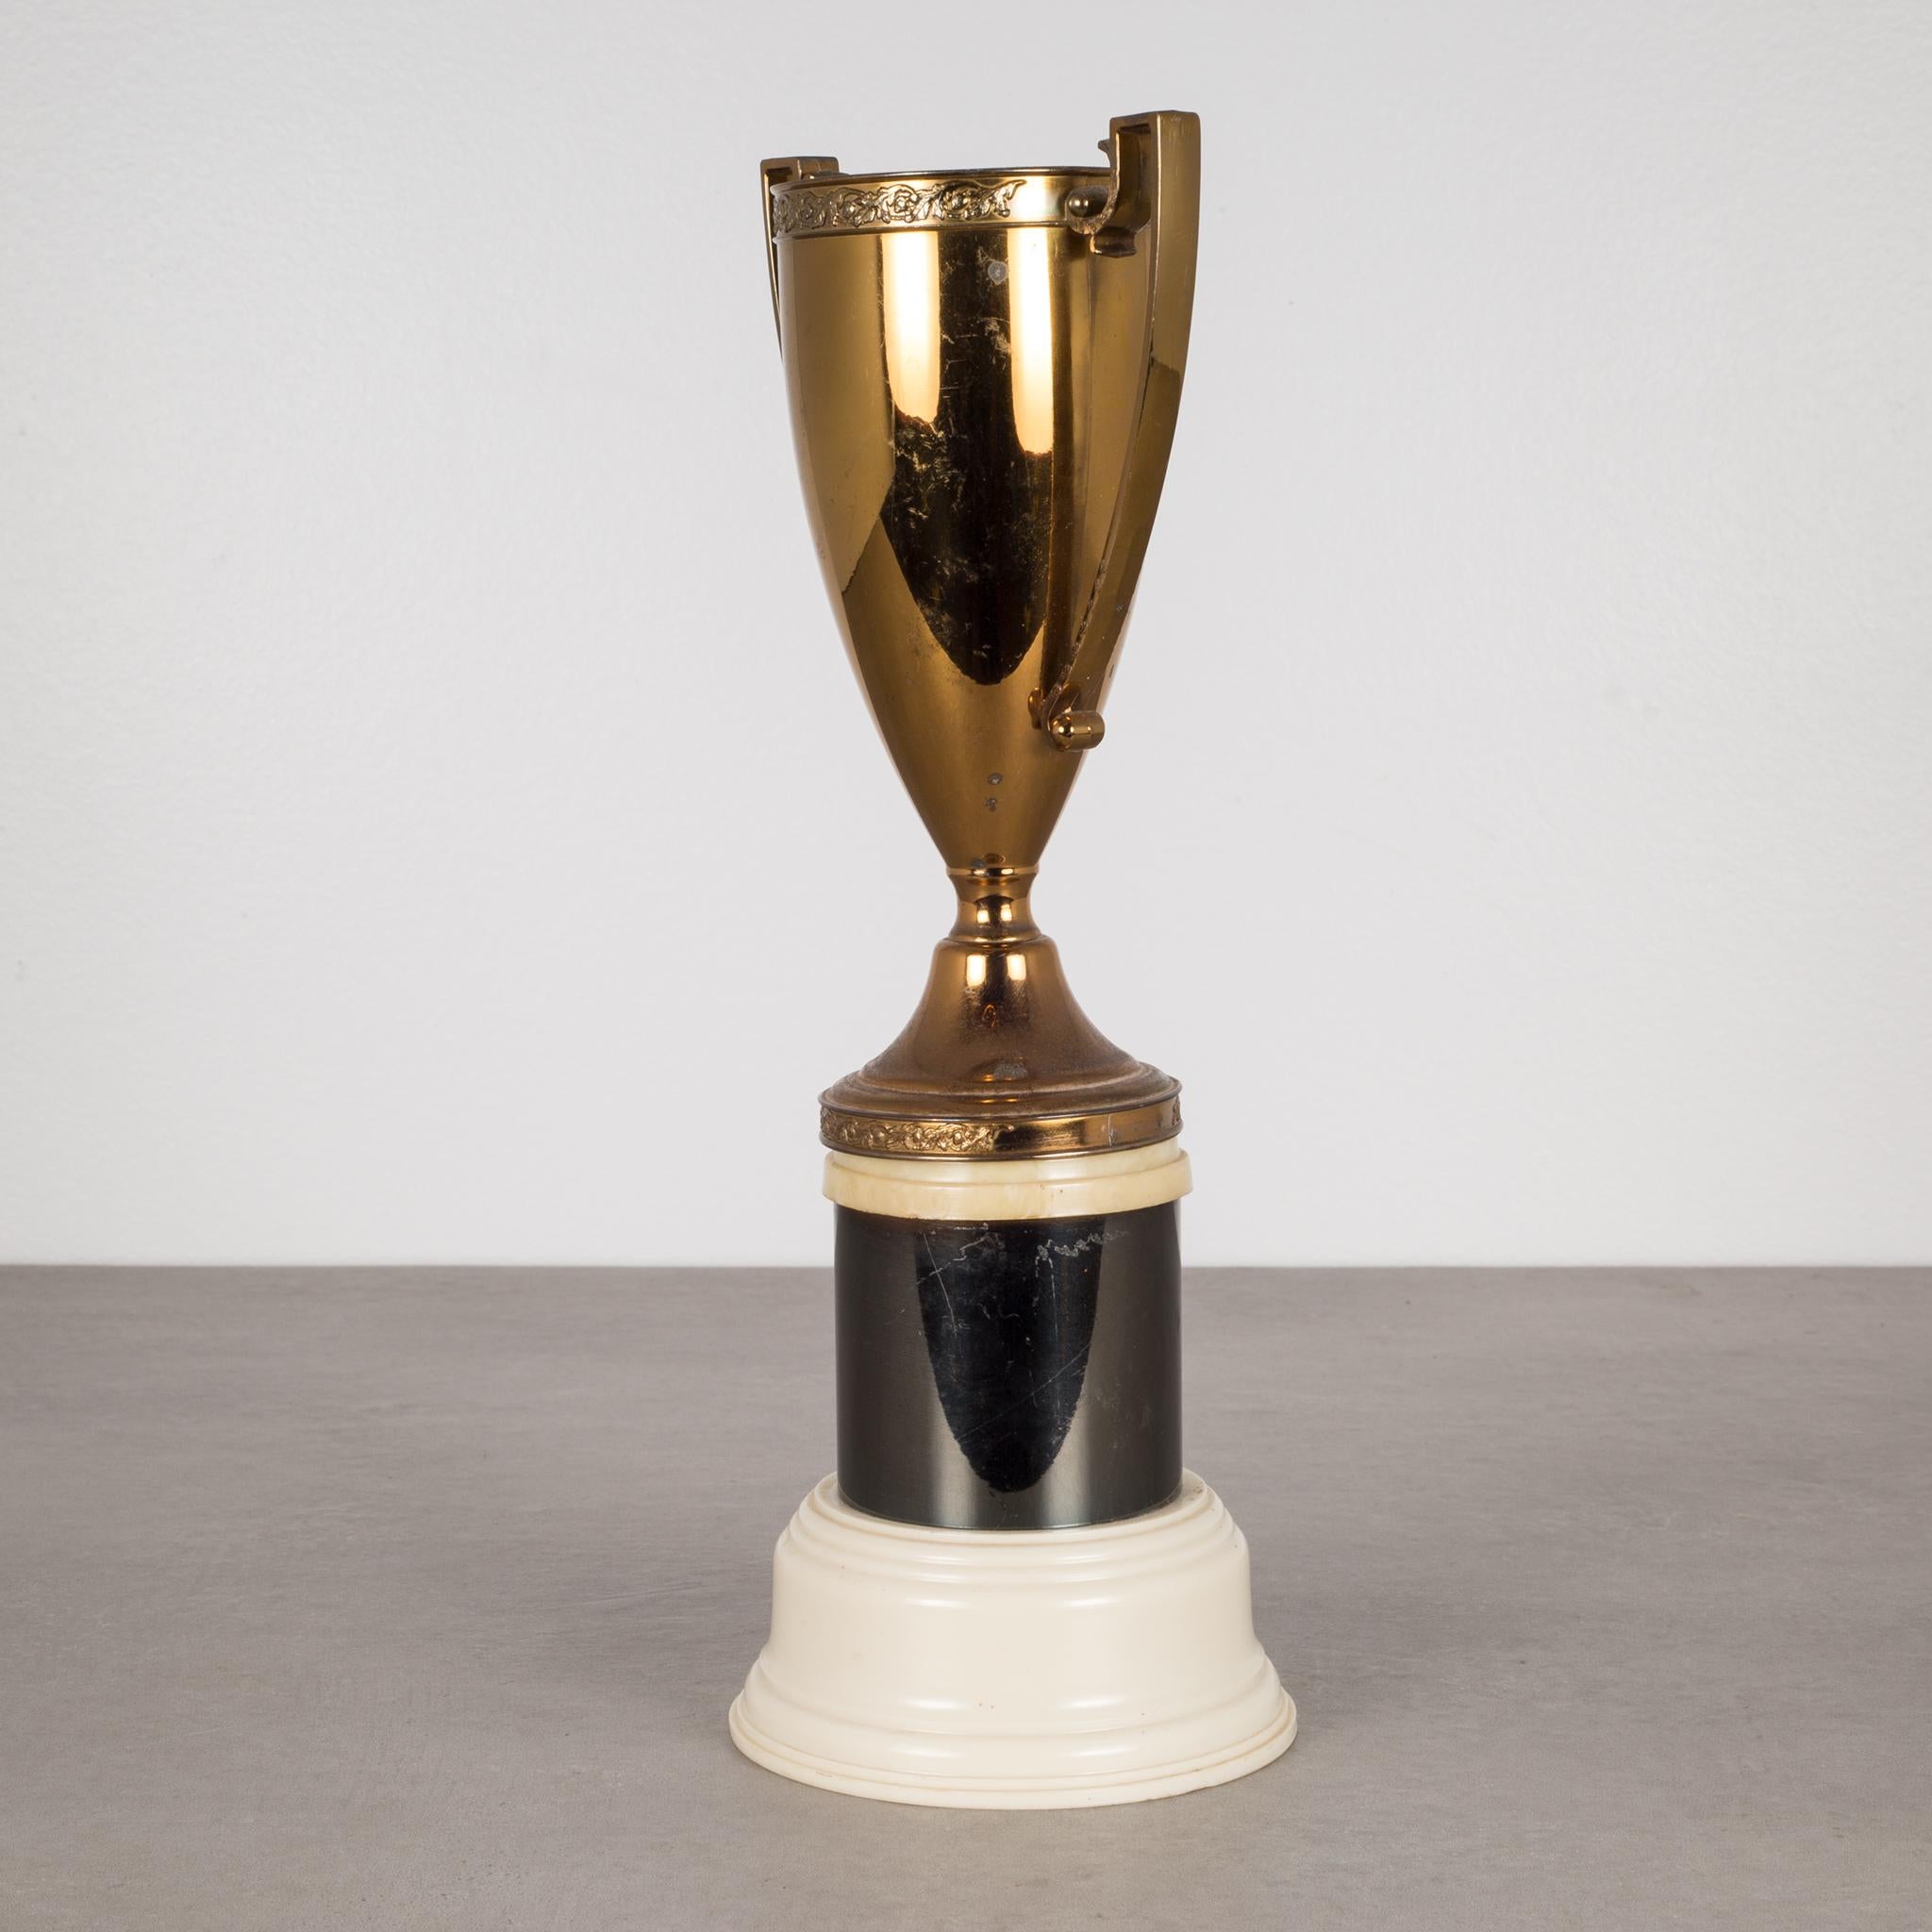 Solid brass loving cup on a black and off white Bakelite base manufactured by Dodge Inc.
No inscription on the body.